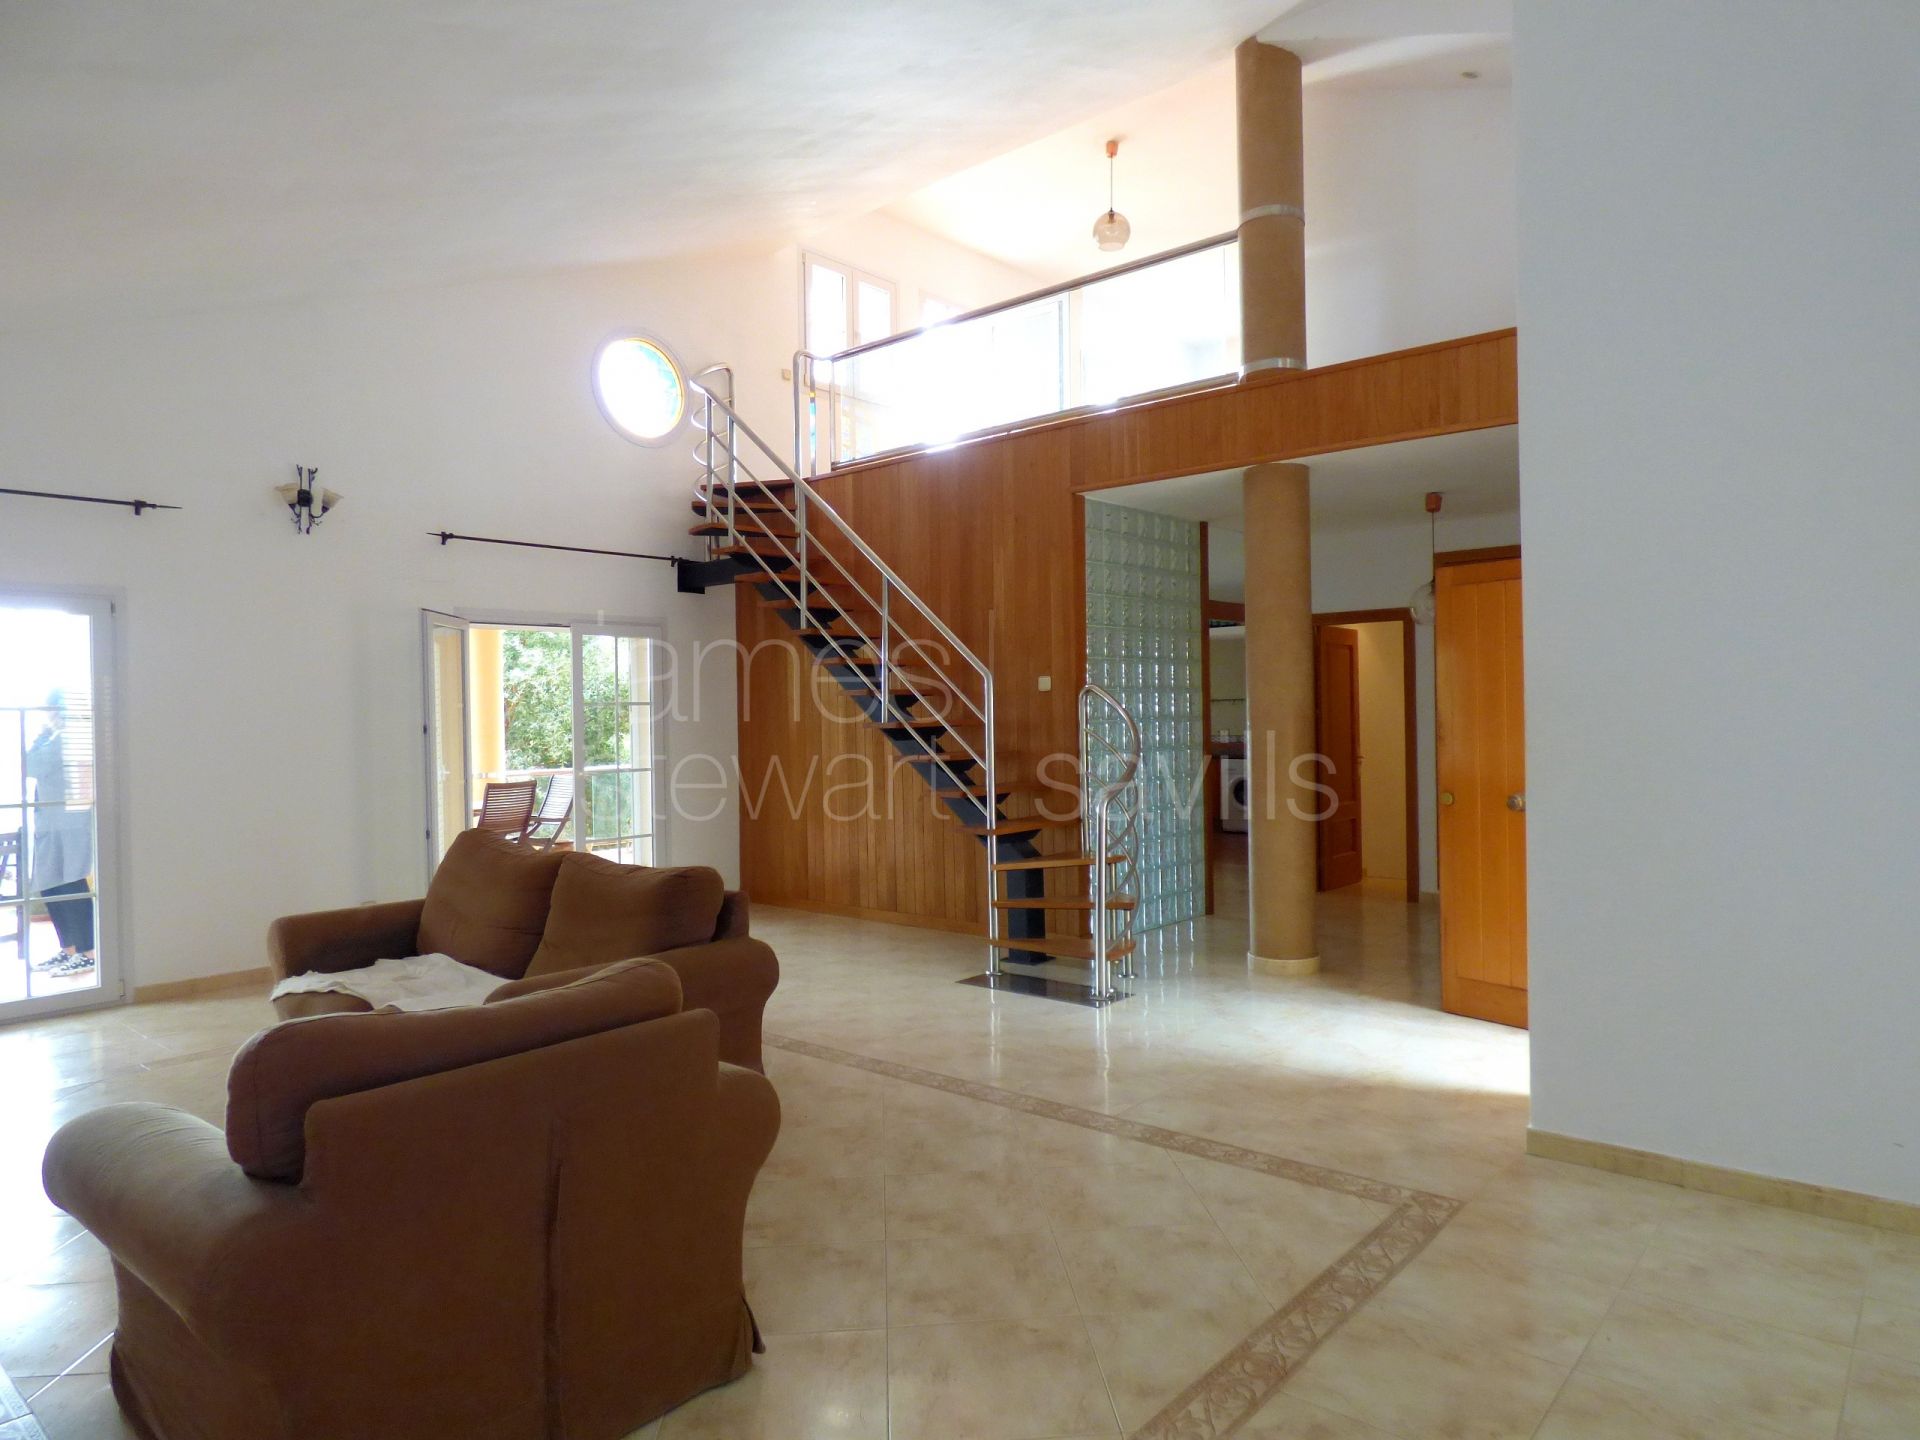 Spacious villa in one of the desirable streets of central Sotogrande